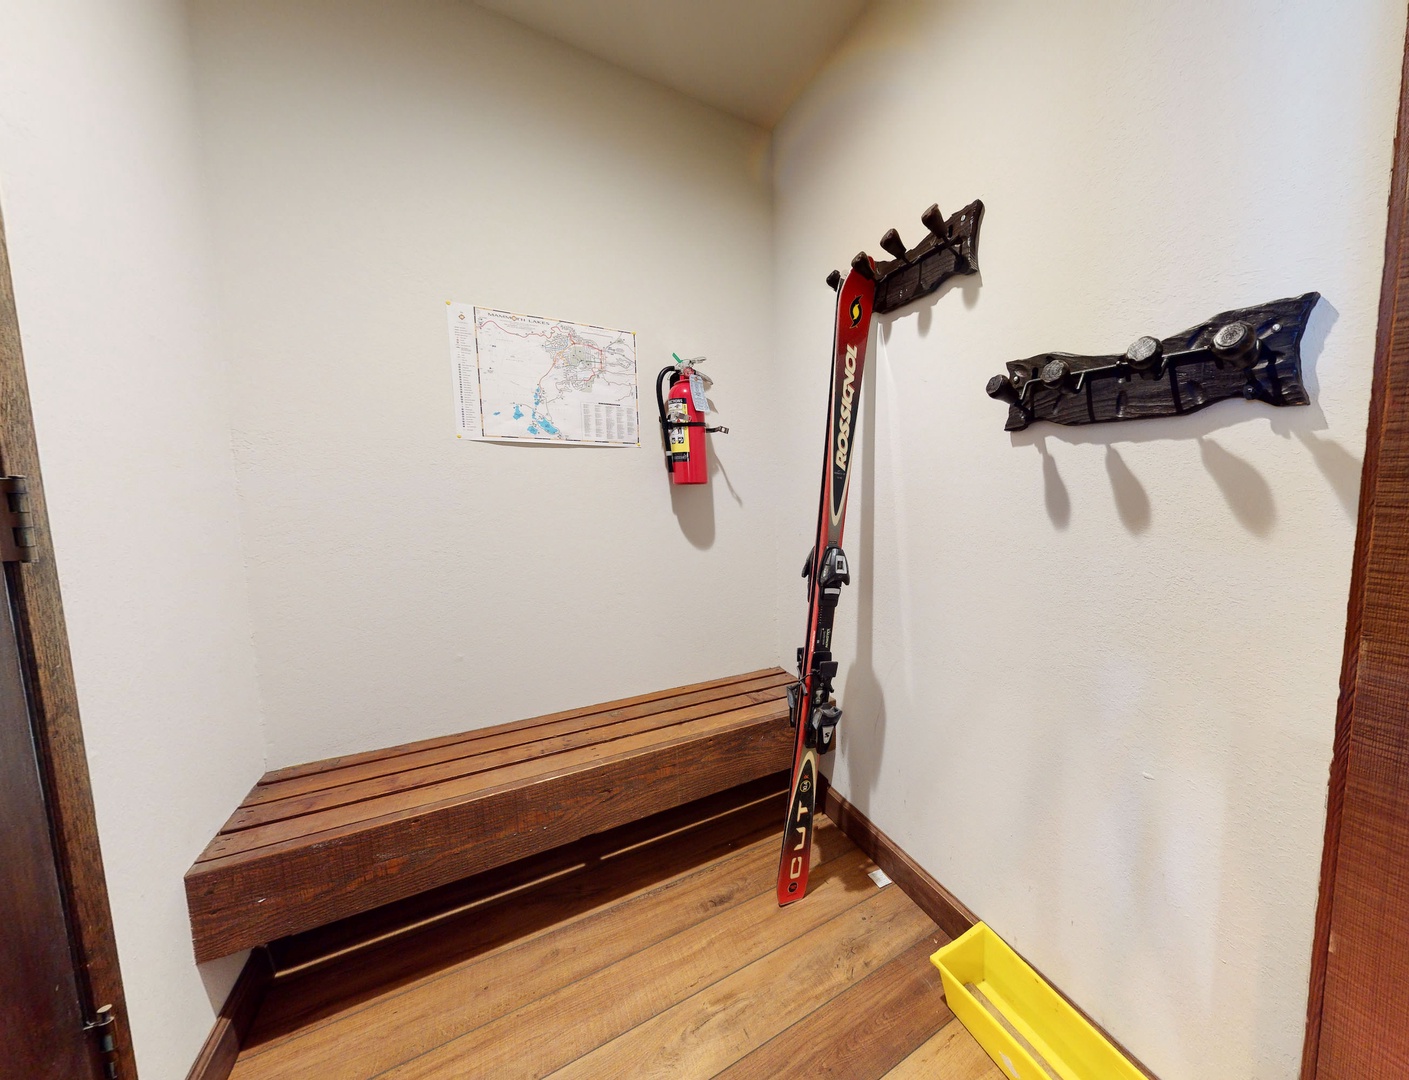 Foyer for storing skis, snowboards and boots!